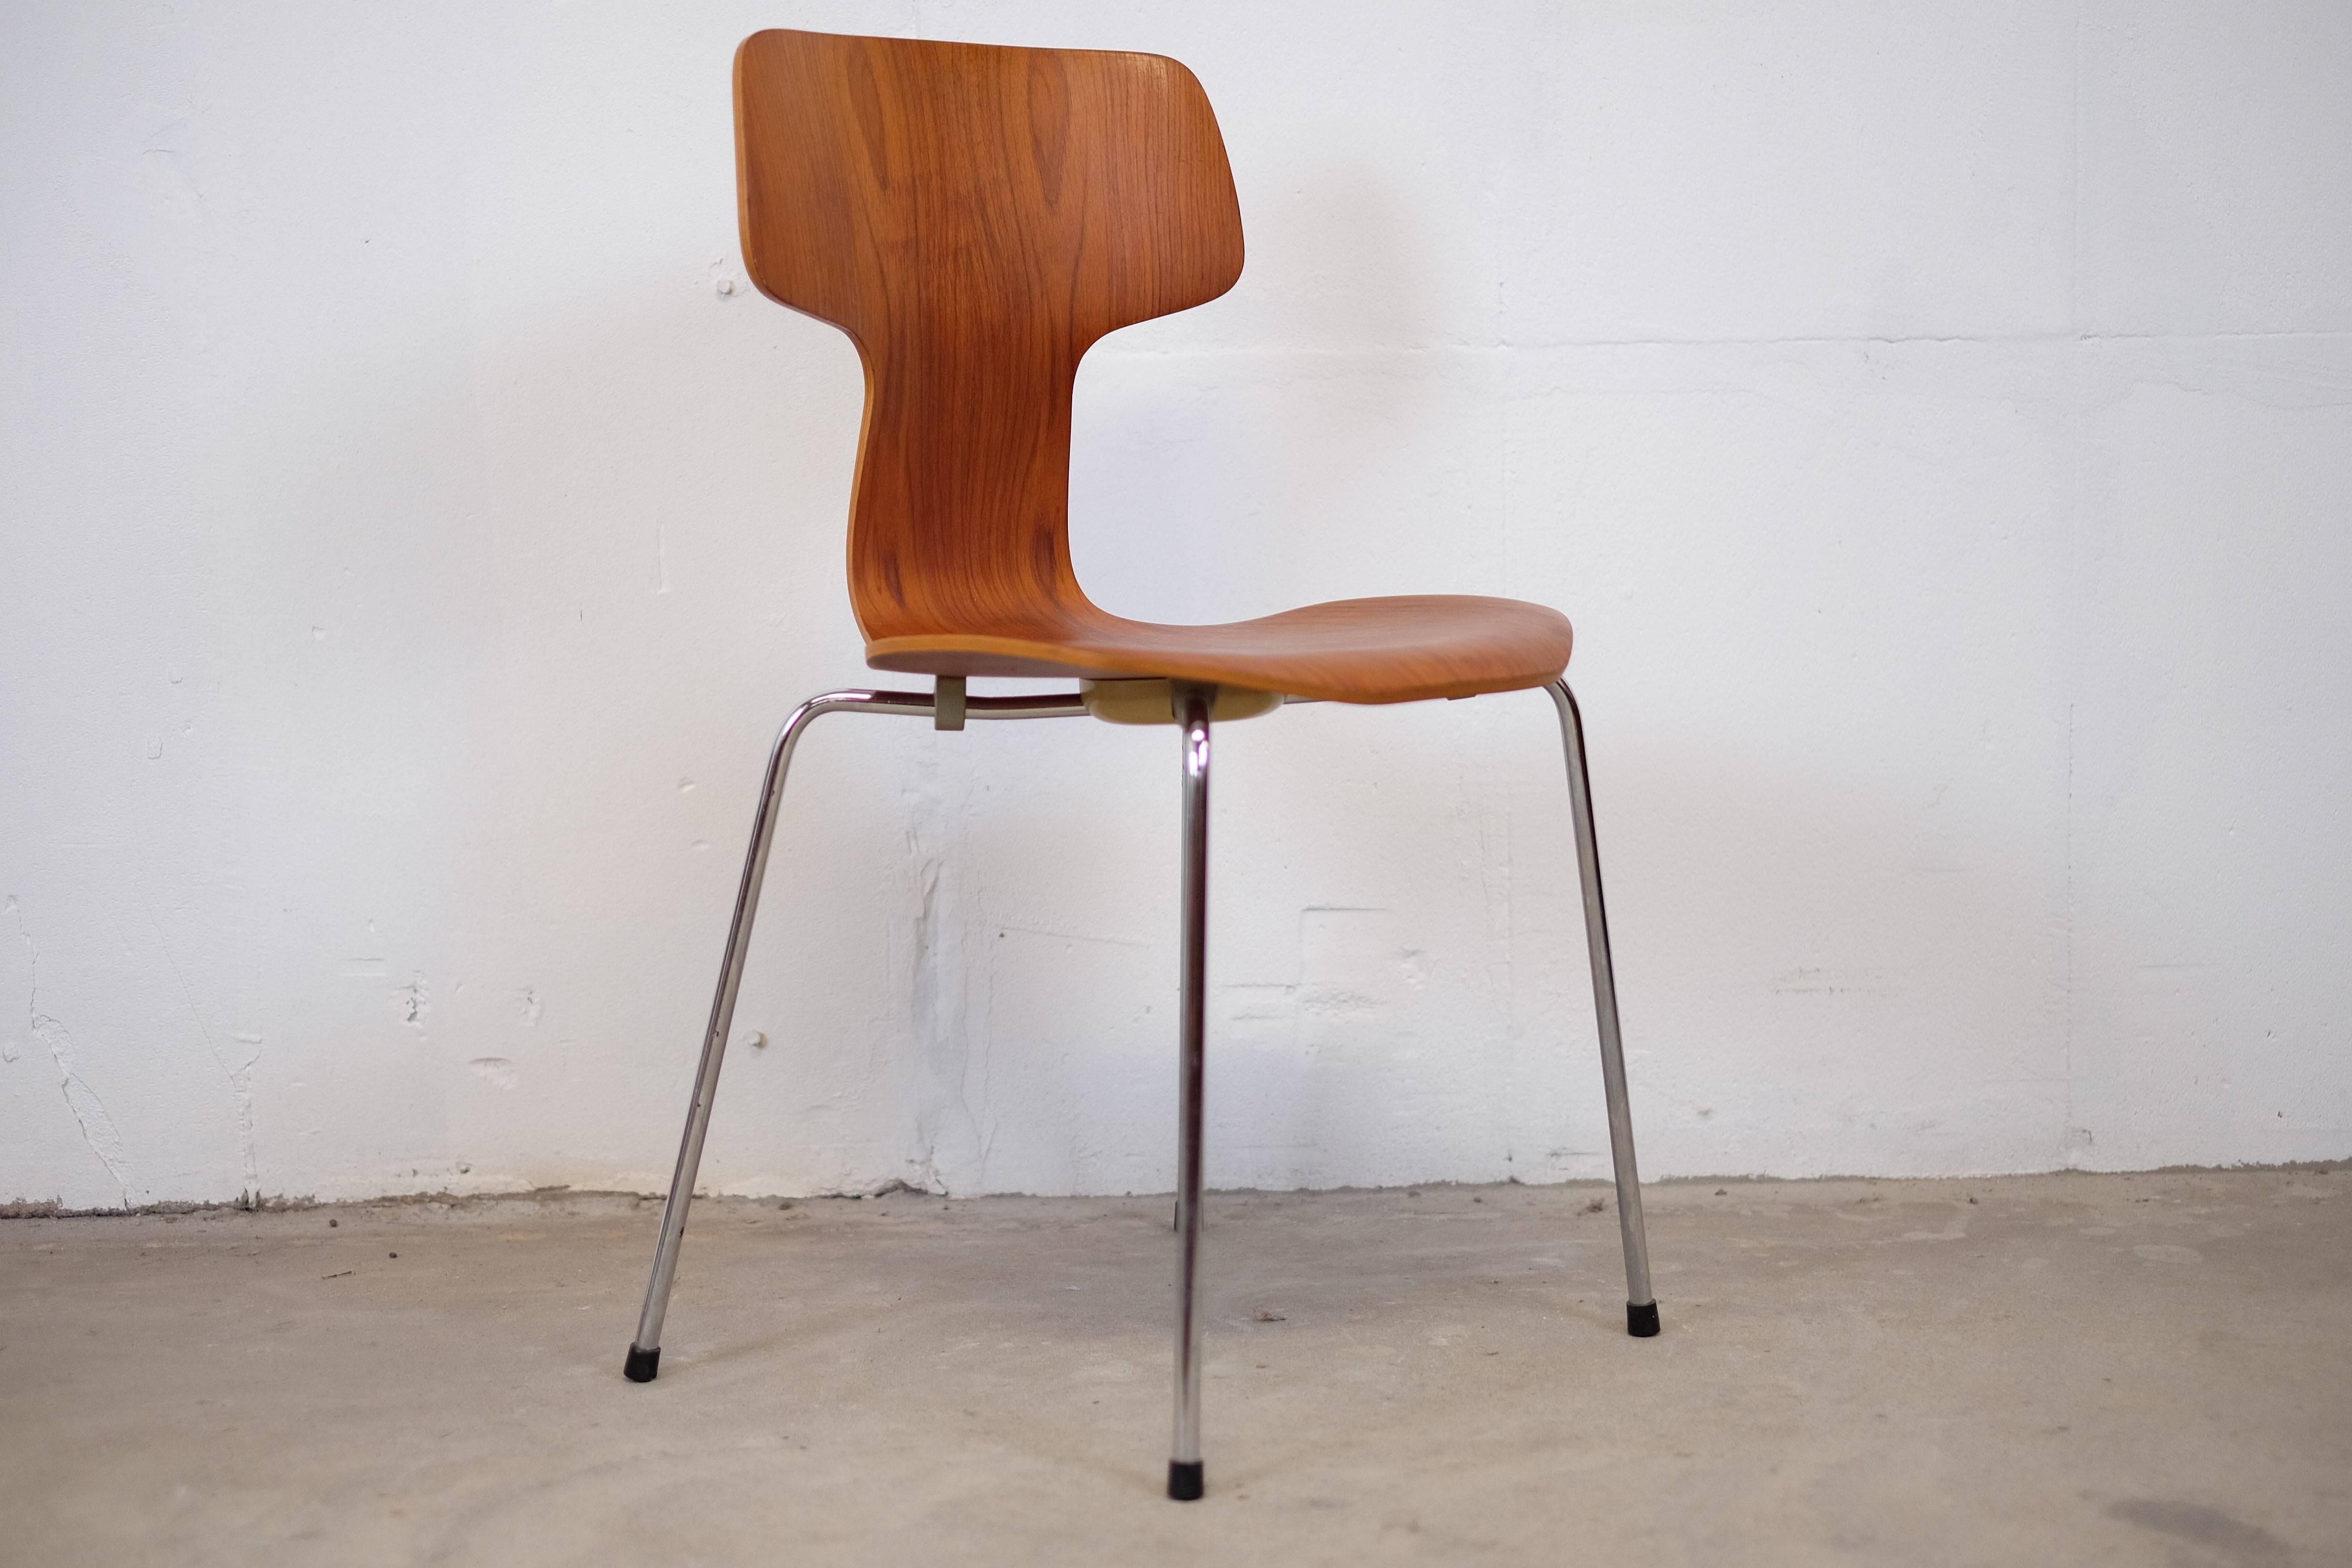 Teak Set of Four 'Hammer' Chairs by Arne Jacobsen